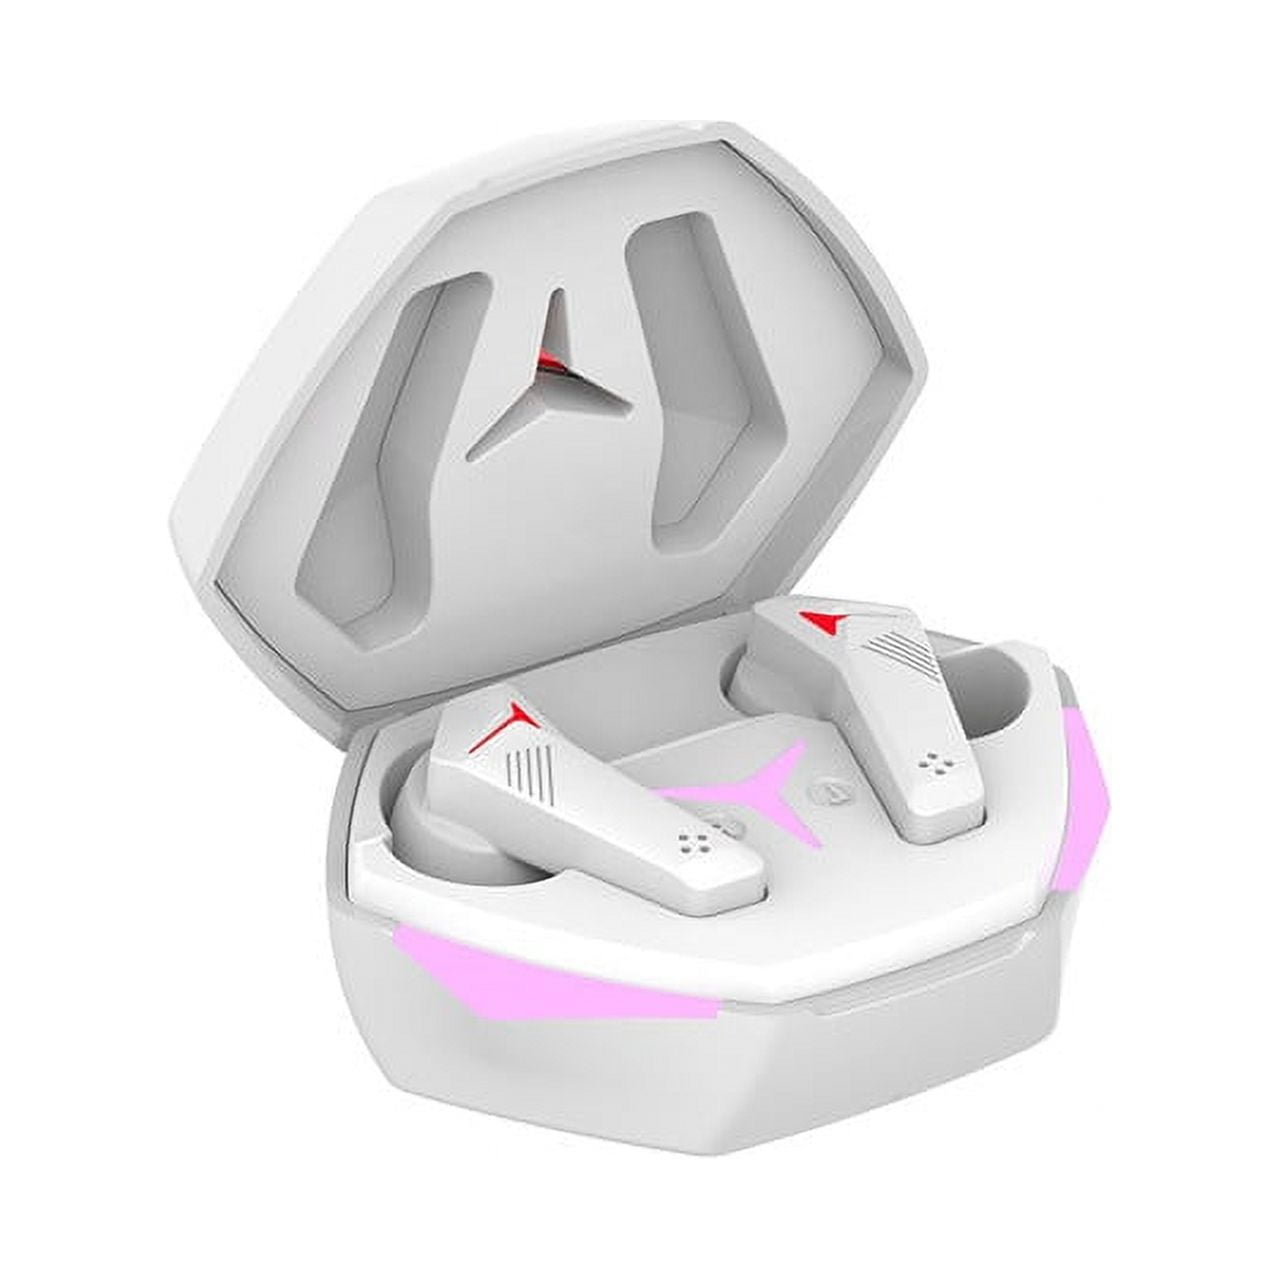 TWS auriculares ANC compatible Bluetooth® TES243N